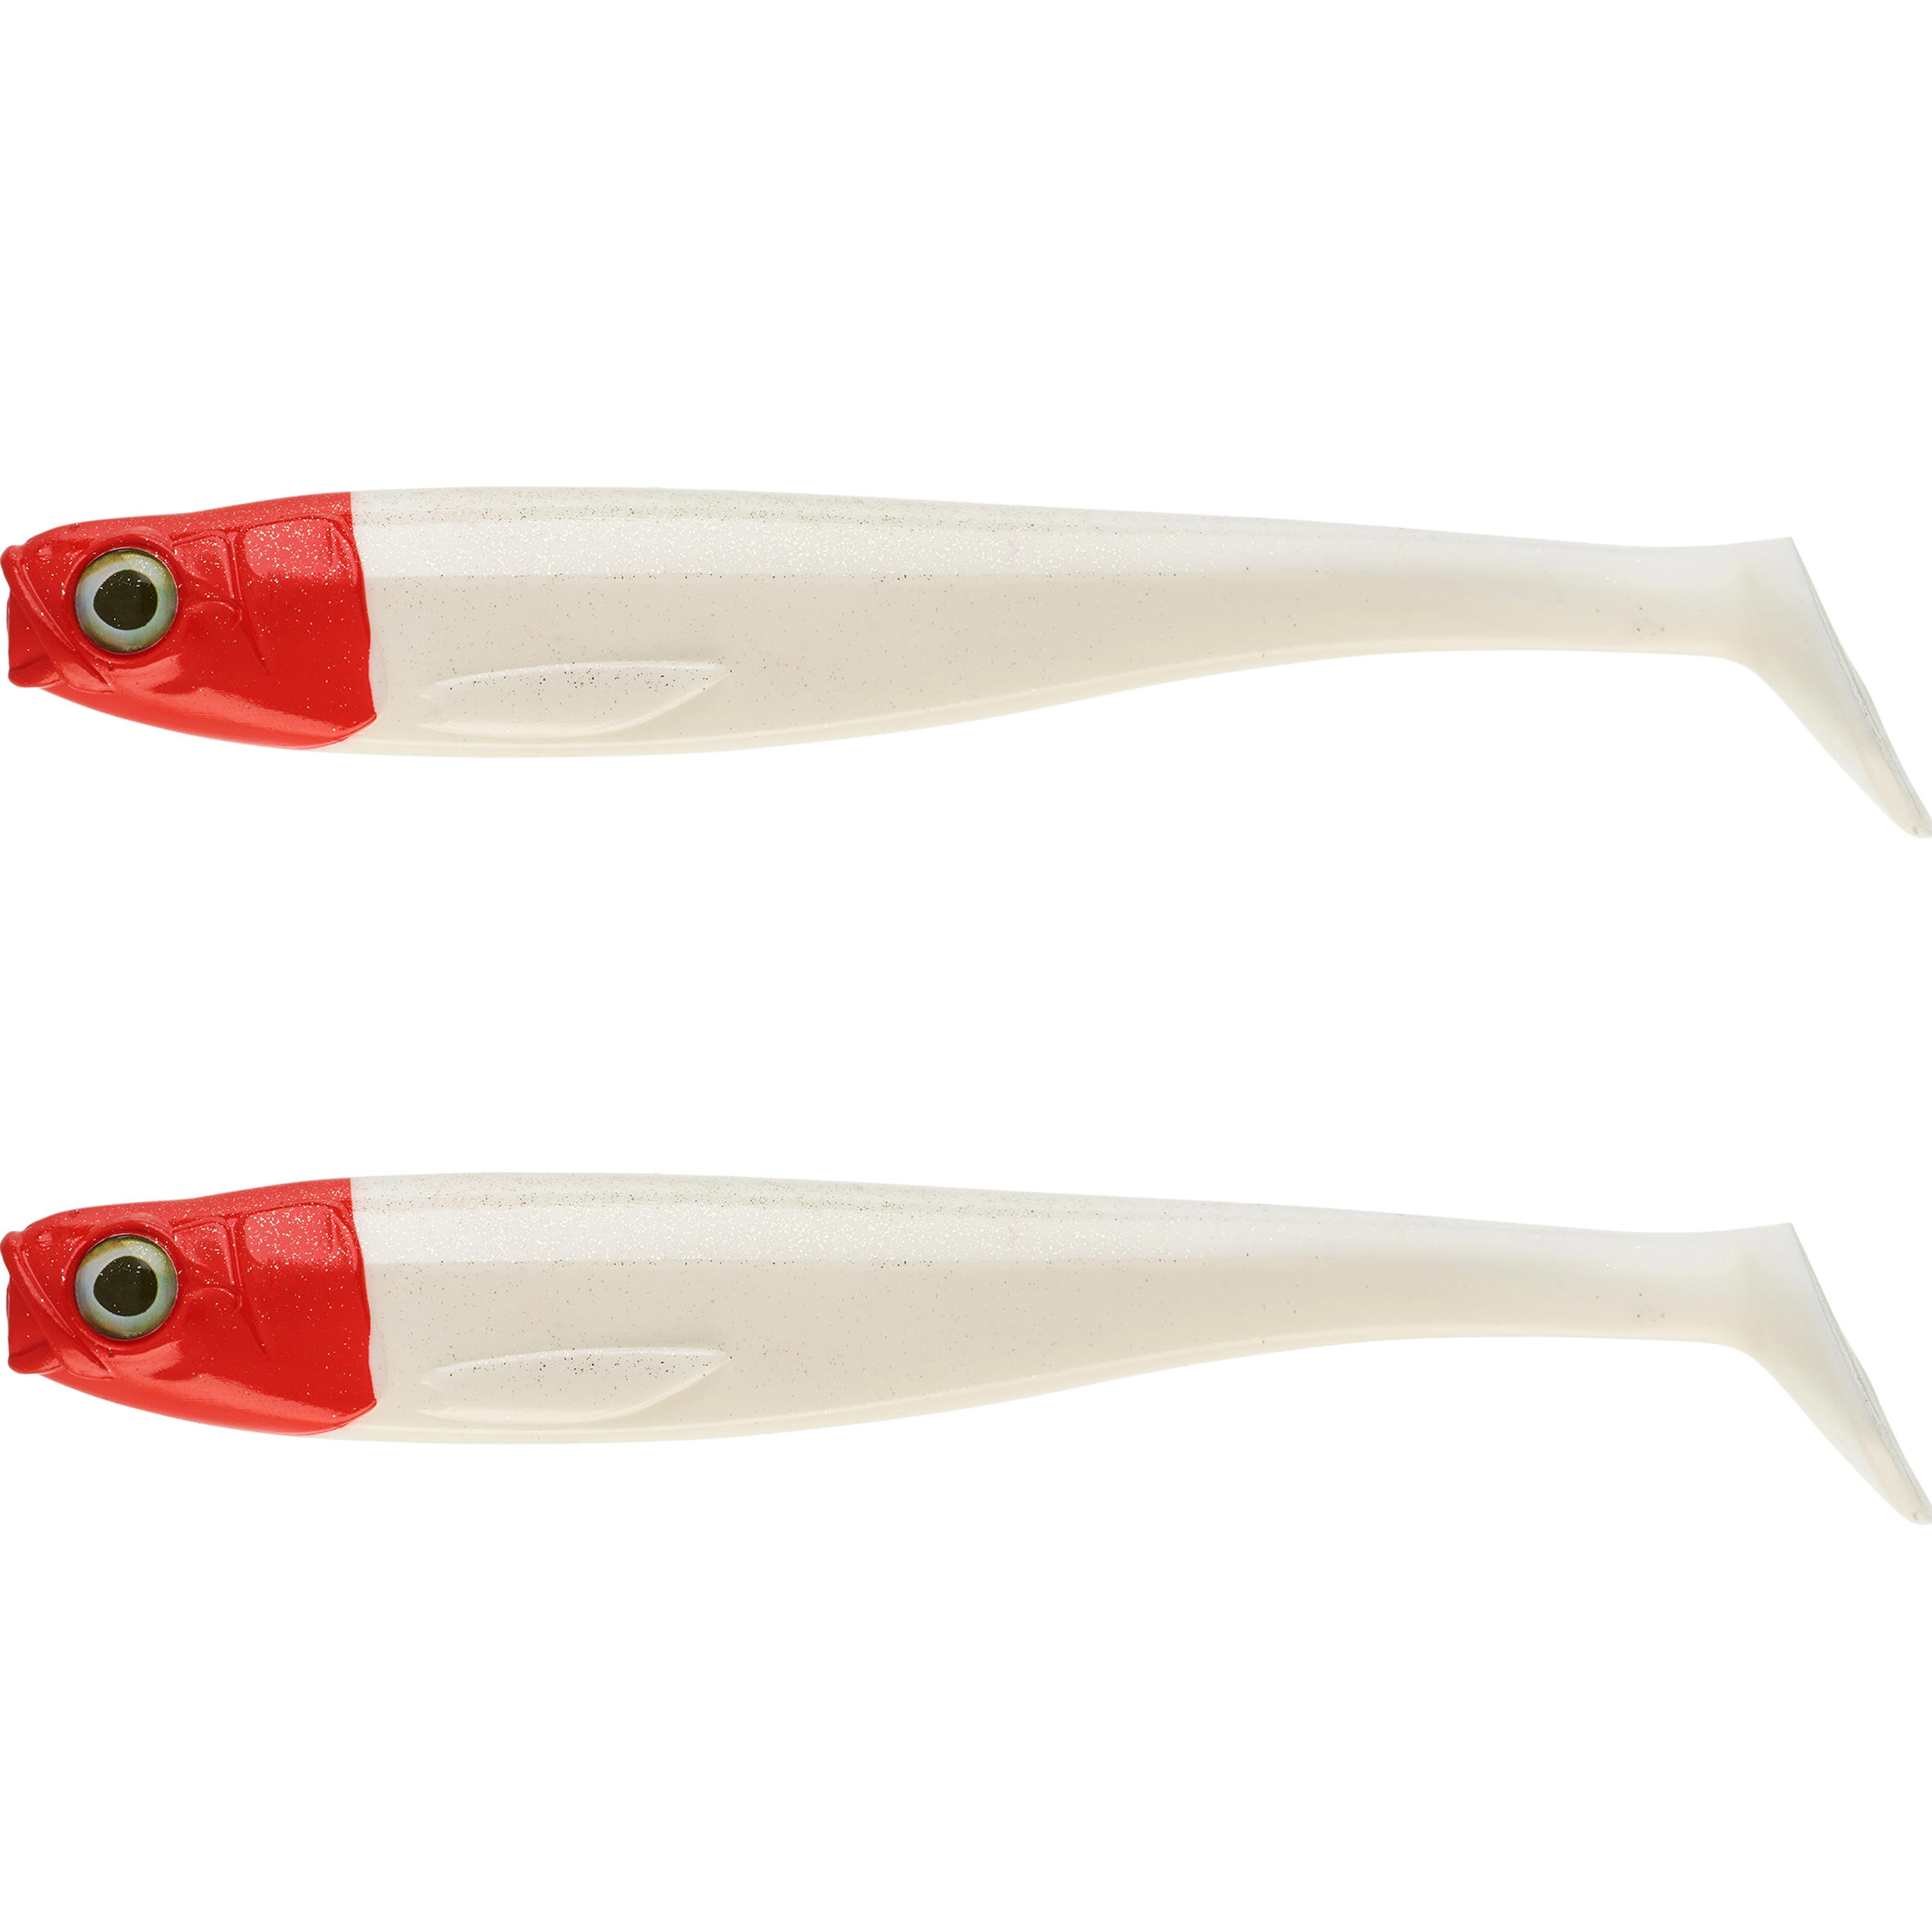 CAPERLAN SOFT LURE FISHING LURE ROGEN 120 RED HEAD X2